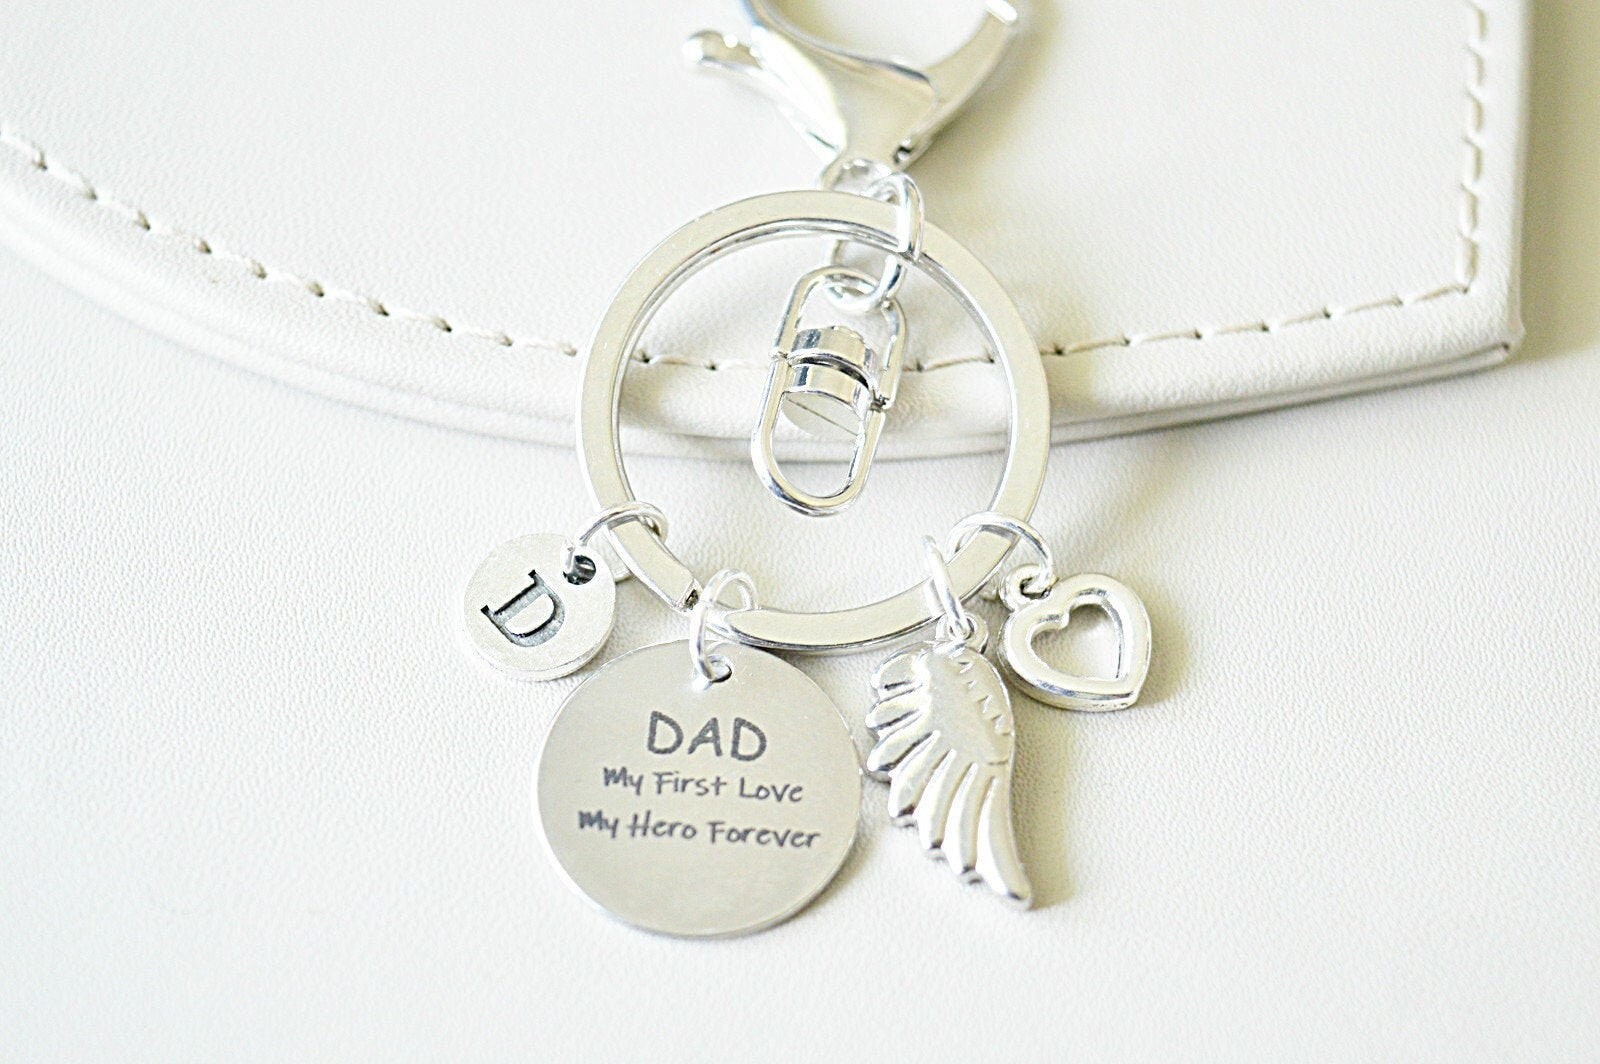 Remembrance Gift Dad, Dad Remembrance Keychain, Dad Sympathy Gift, Loss of Dad, Sympathy gift dad, Dad Wedding, Father Gift, Dad Birthday